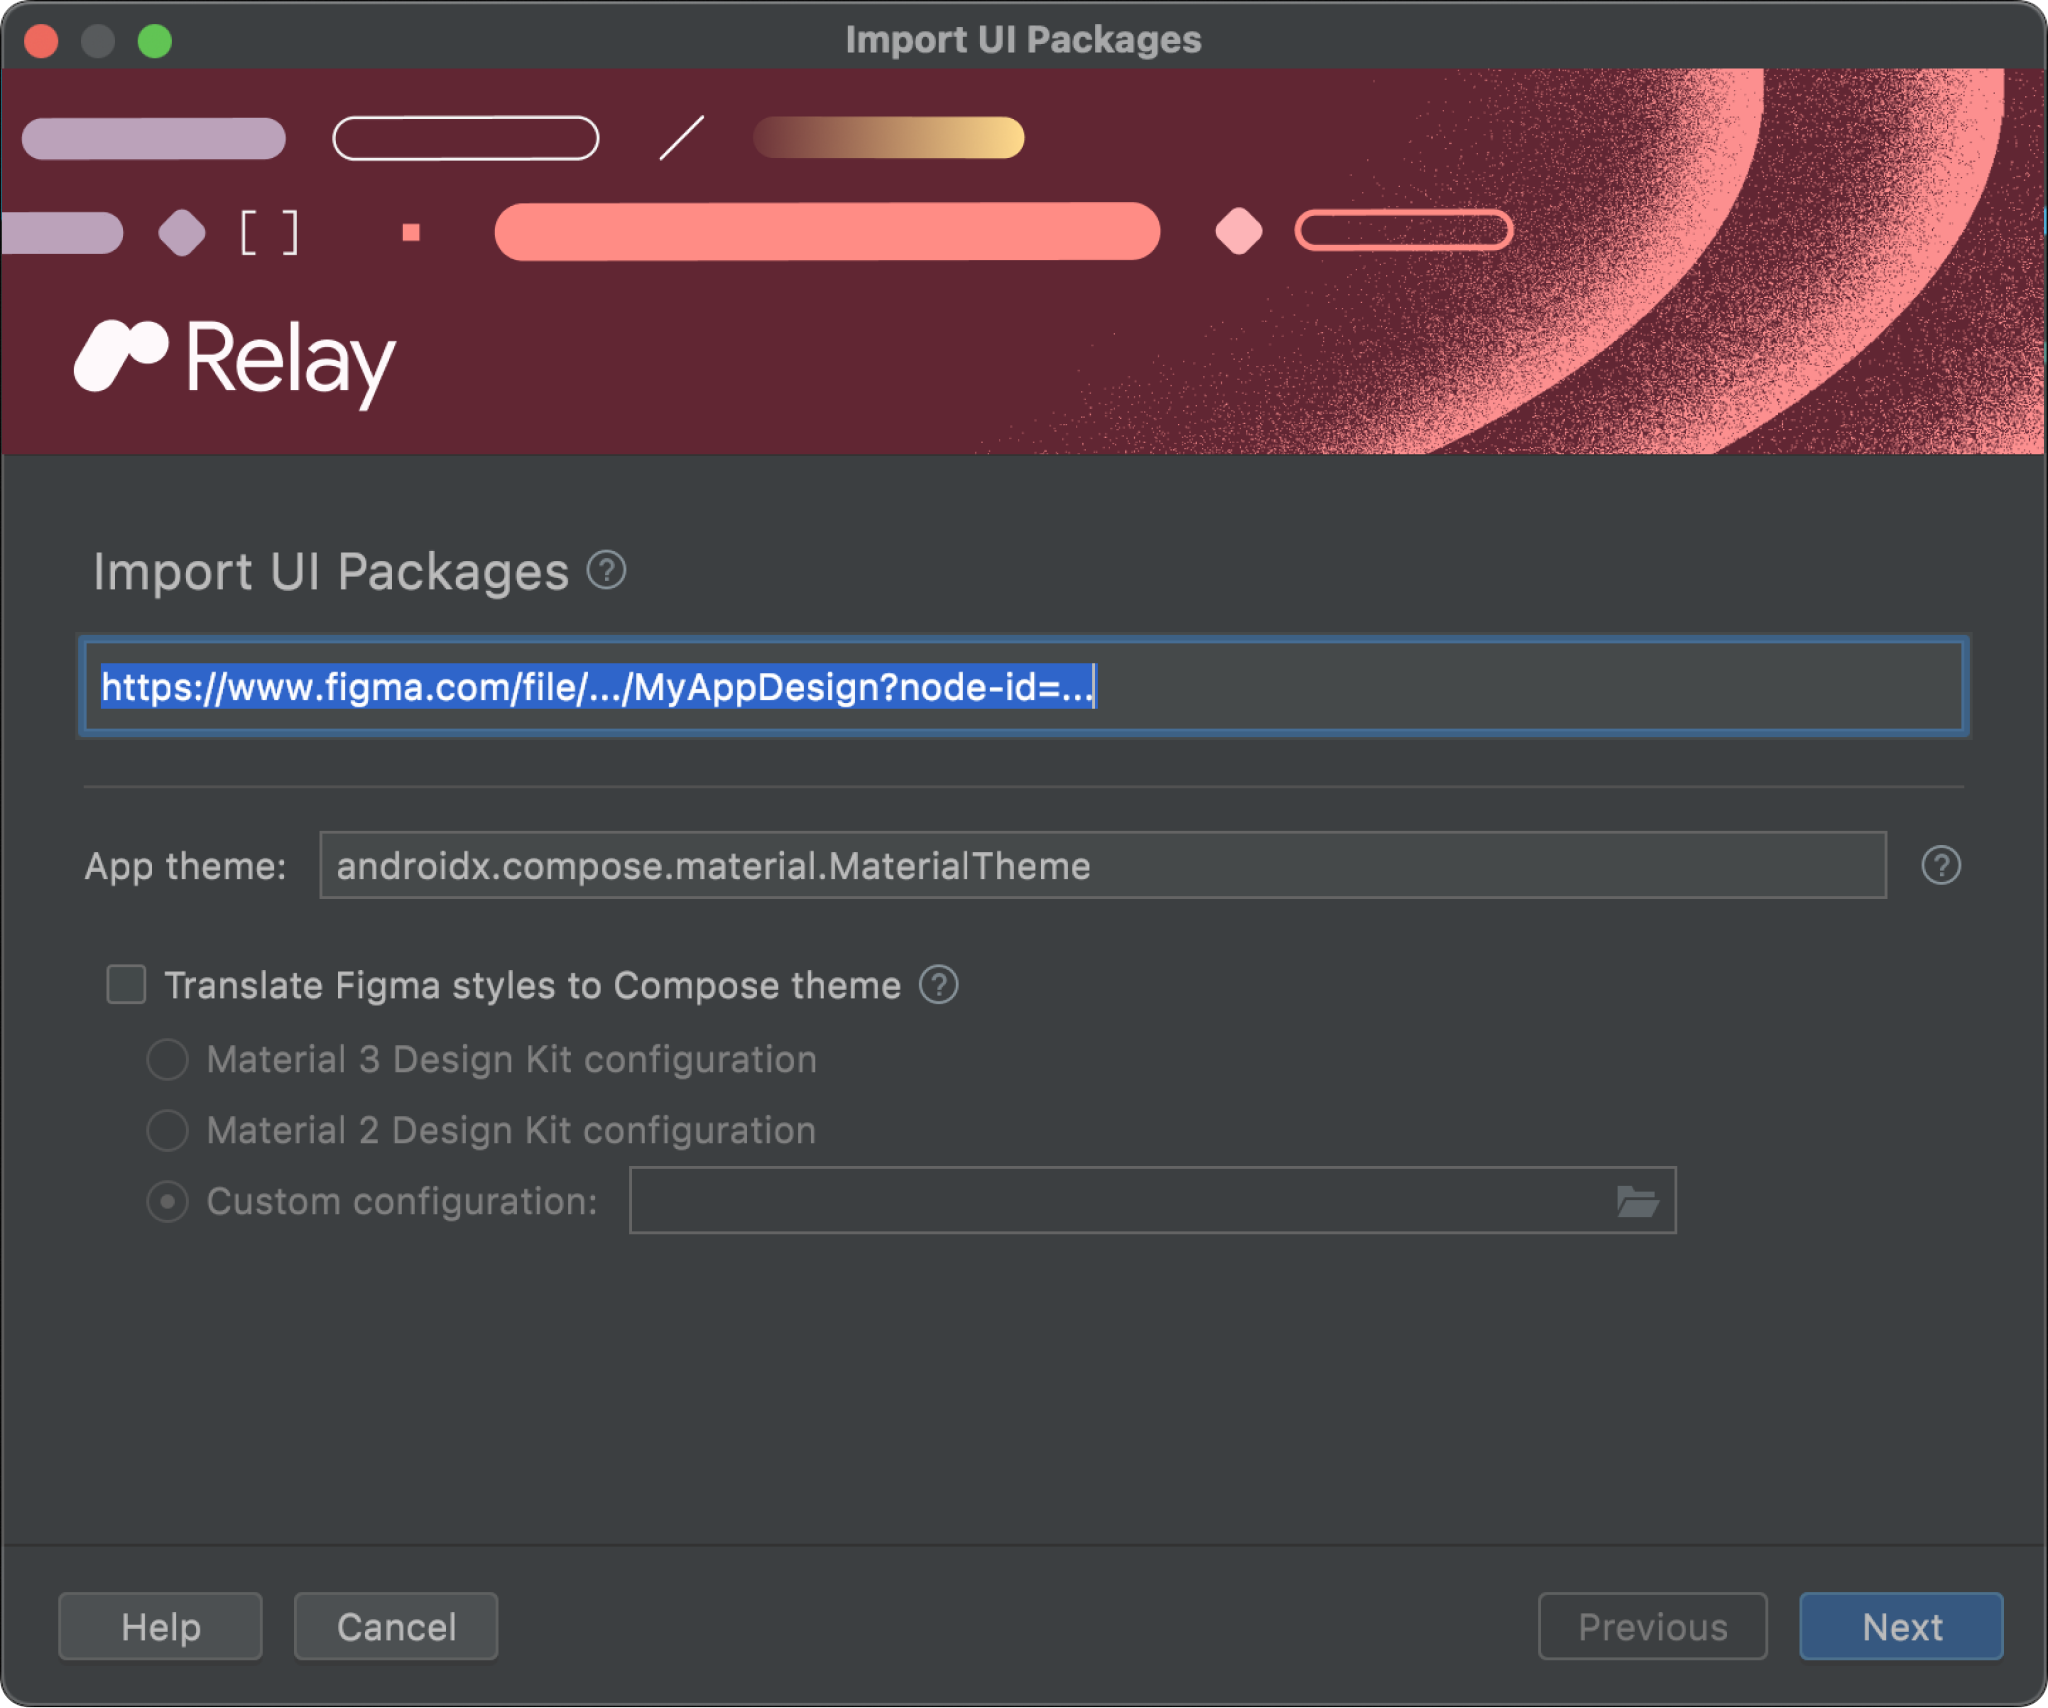 Relay for Android Studio 外掛程式 - 匯入 UI 套件對話方塊